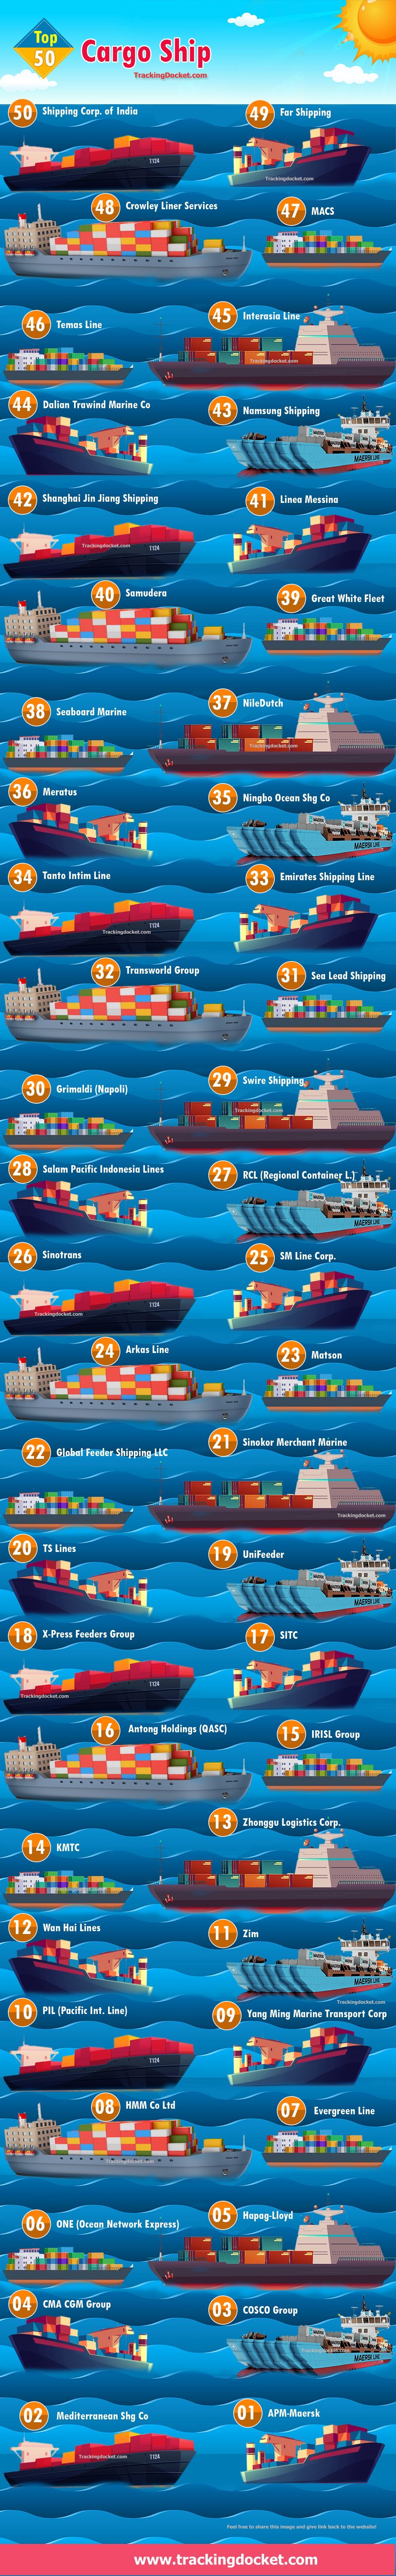 Biggest shipping companies in the world explained with an infographic